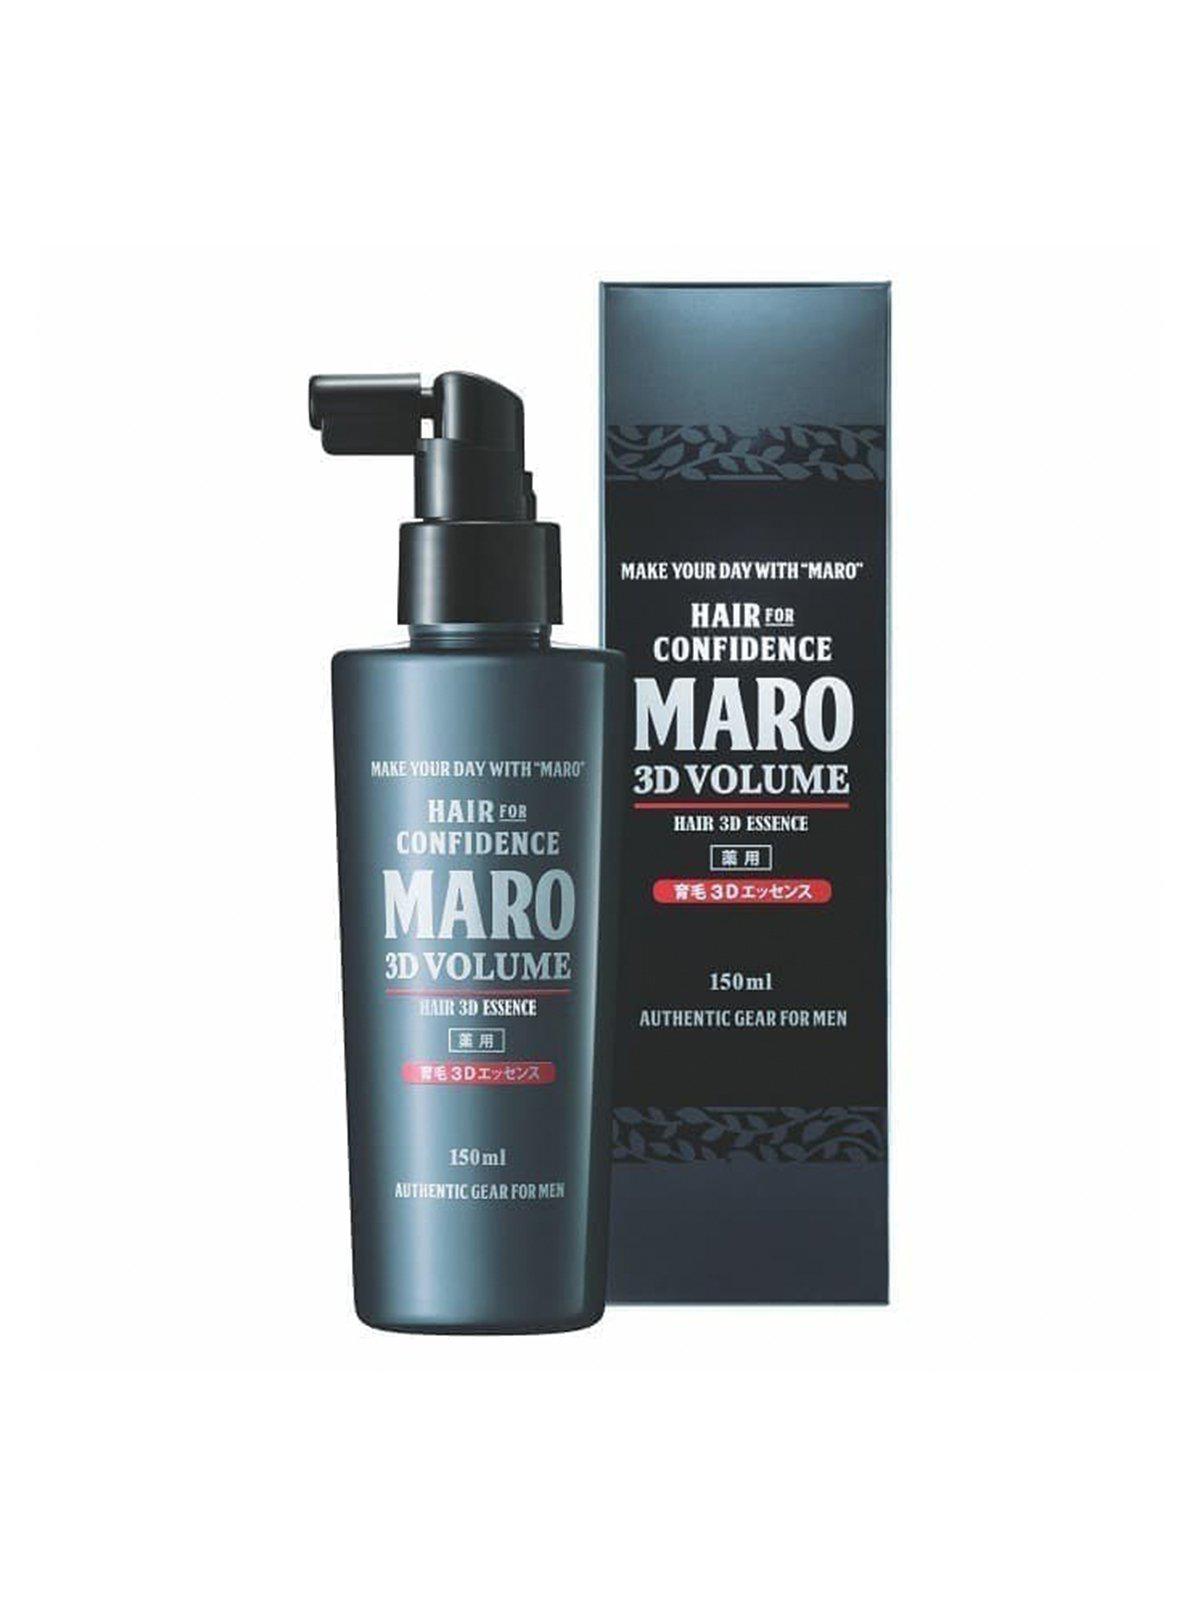 MARO 3D Volume Hair Essence 150ml - MORE by Morello Indonesia